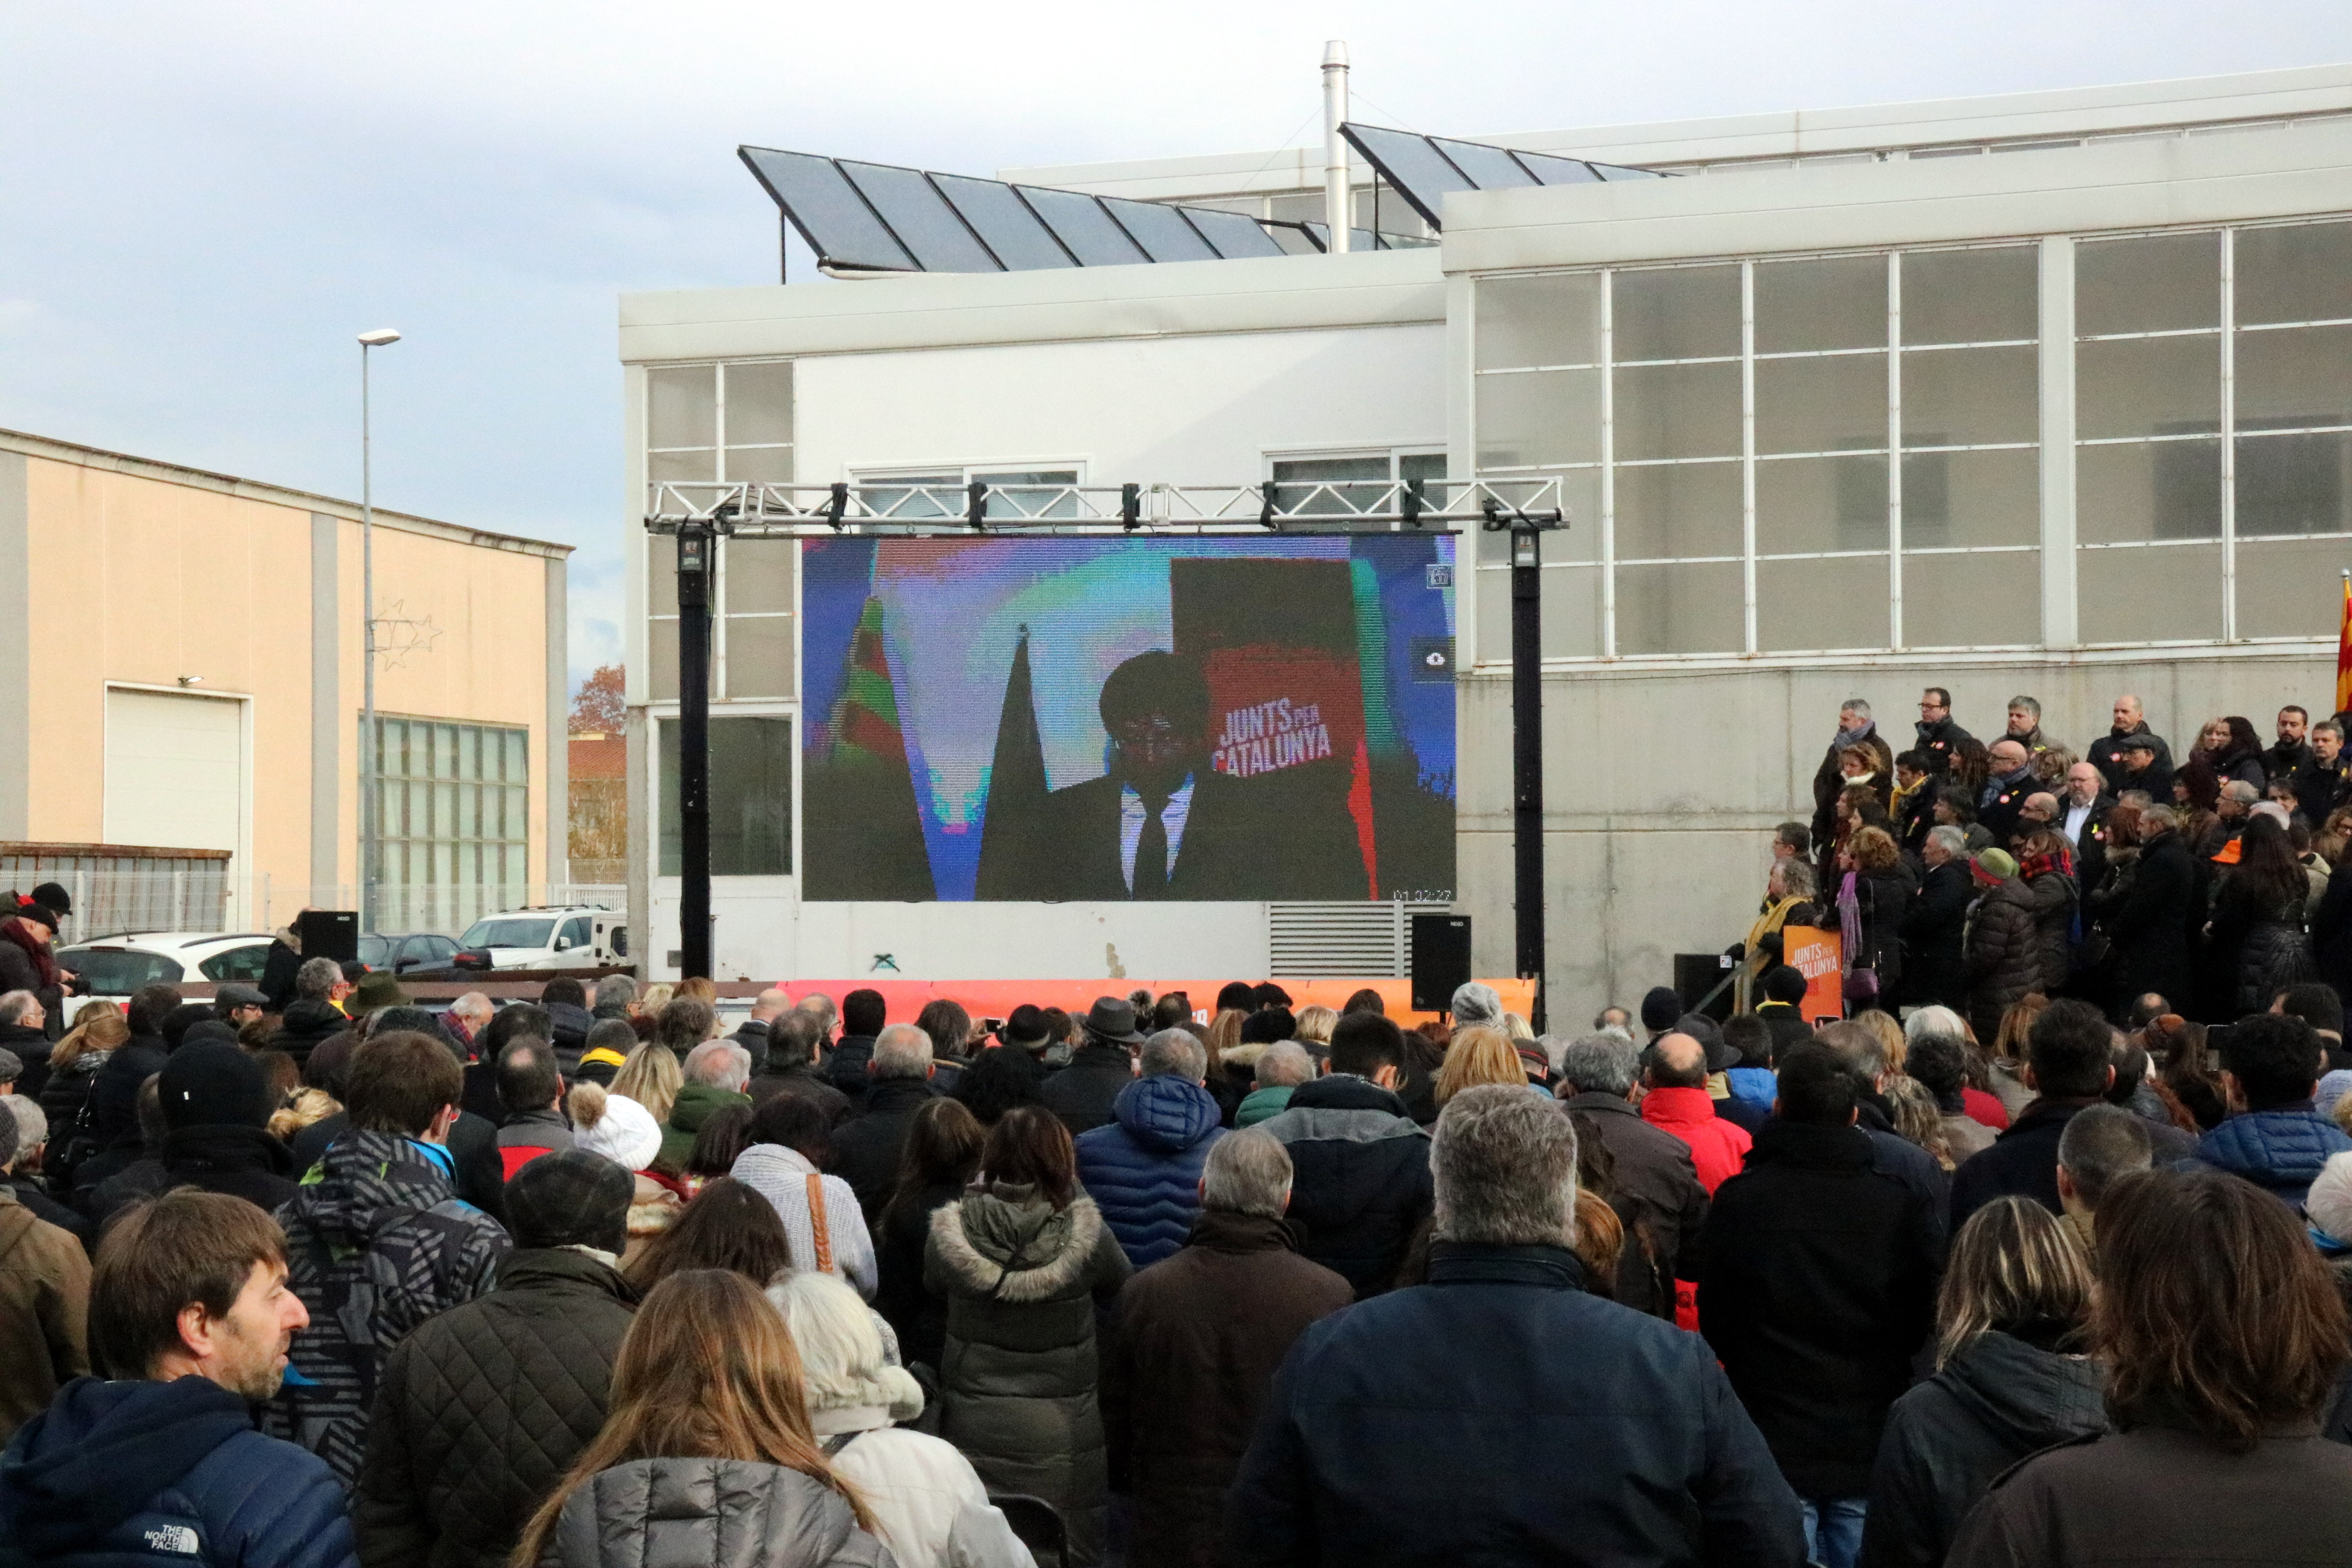 Carles Puigdemont addresses a group of people from a screen in a town in the north of Catalonia (by Gerard Vilà)